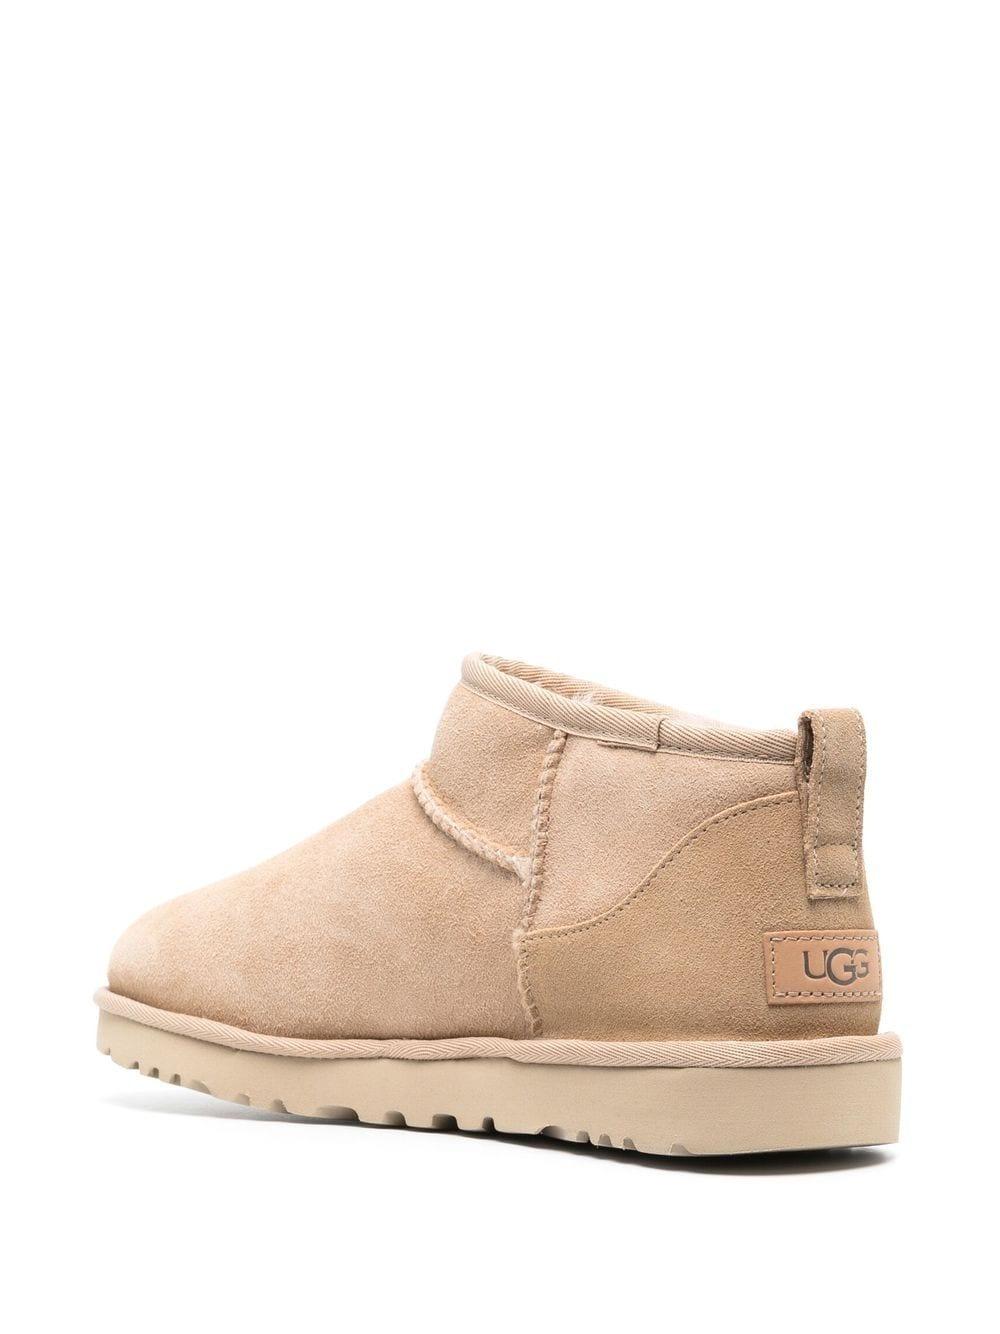 UGG Classic Ultra Mini Sheepskin Ankle Boots in Natural | Lyst